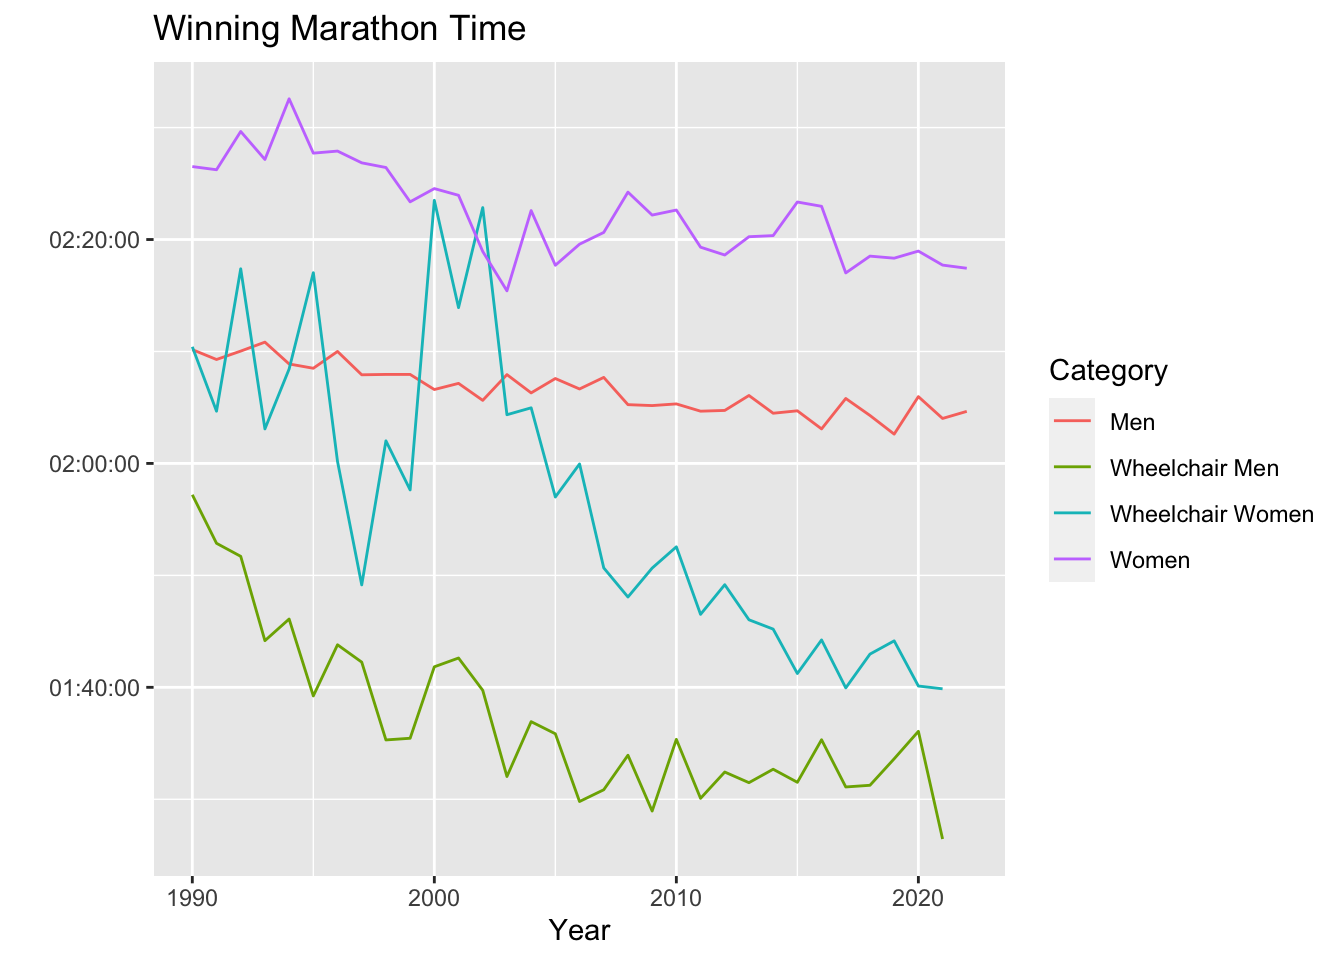 Line plot with year on the x-axis and winning marathon time on the y-axis.  Four lines are given, one for each of the four categories of participants which are women, women in wheelchairs, men, and men in wheelchairs.  After about 2003, women in wheelchairs consistently beat the men after which date the winning times were consistently ranked with men in wheelchairs as fastest, then women in wheelchairs, then men, then women.